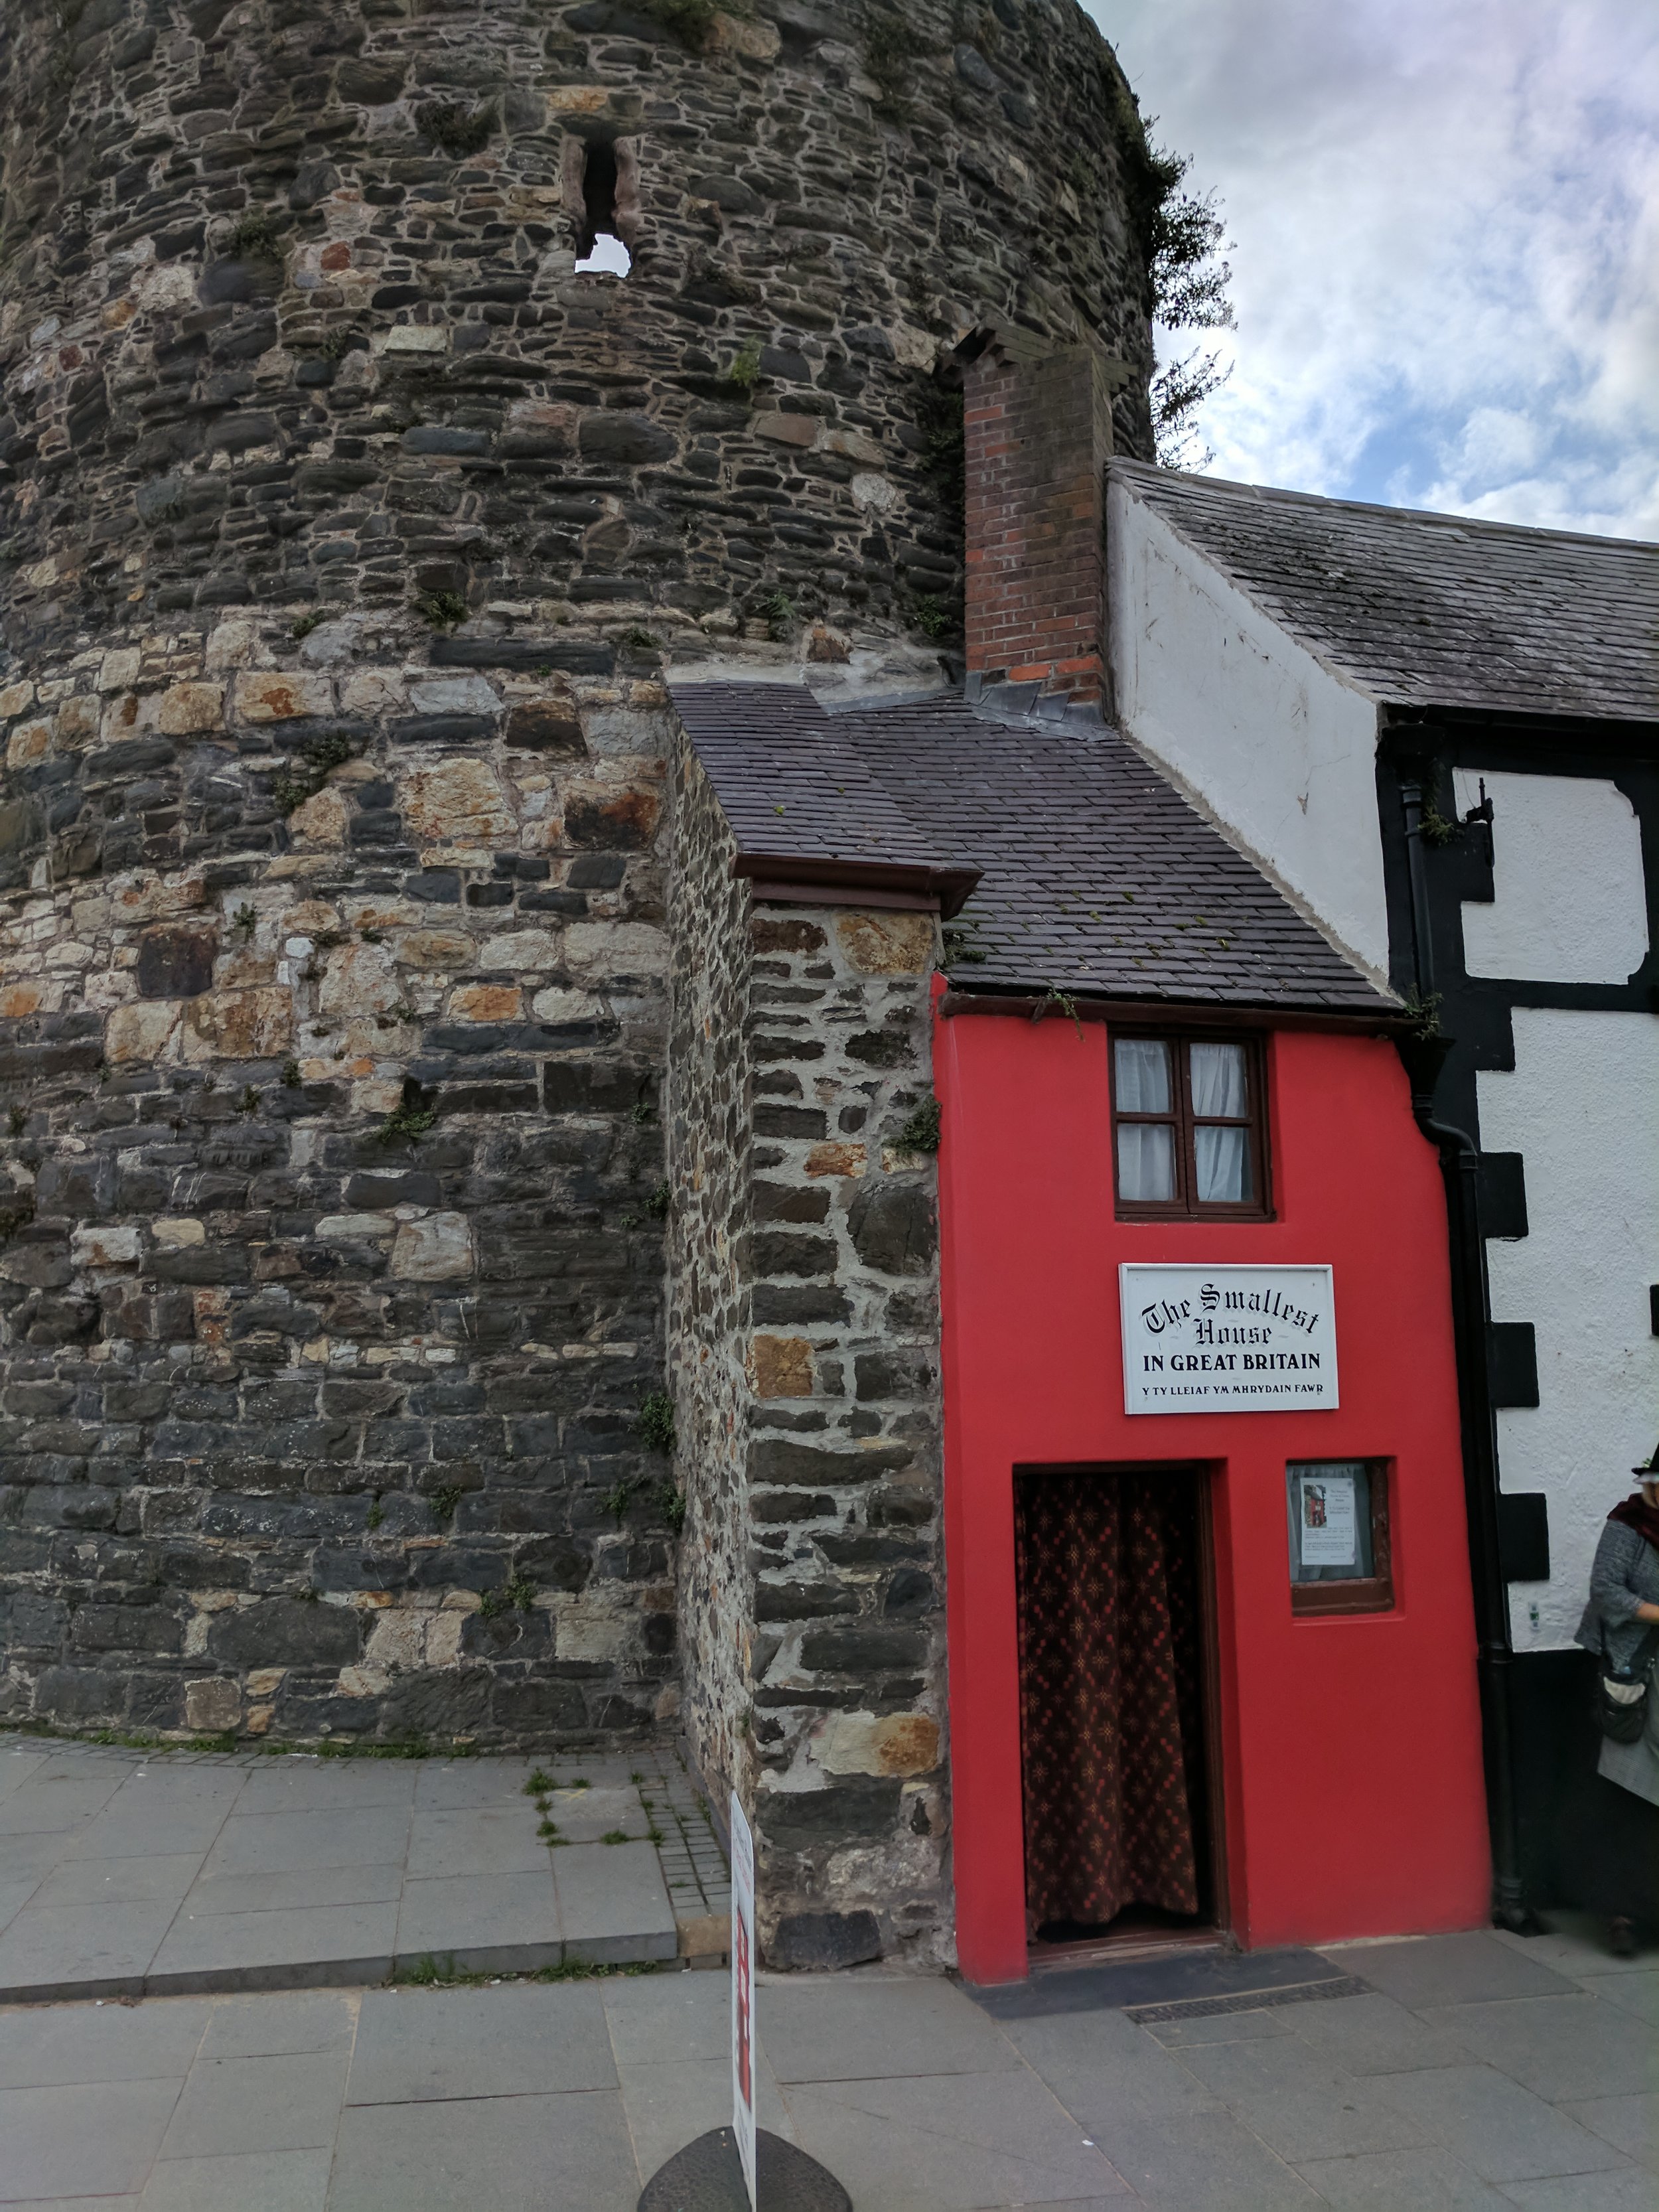  The Smallest House in Great Britain in Conwy, Wales 